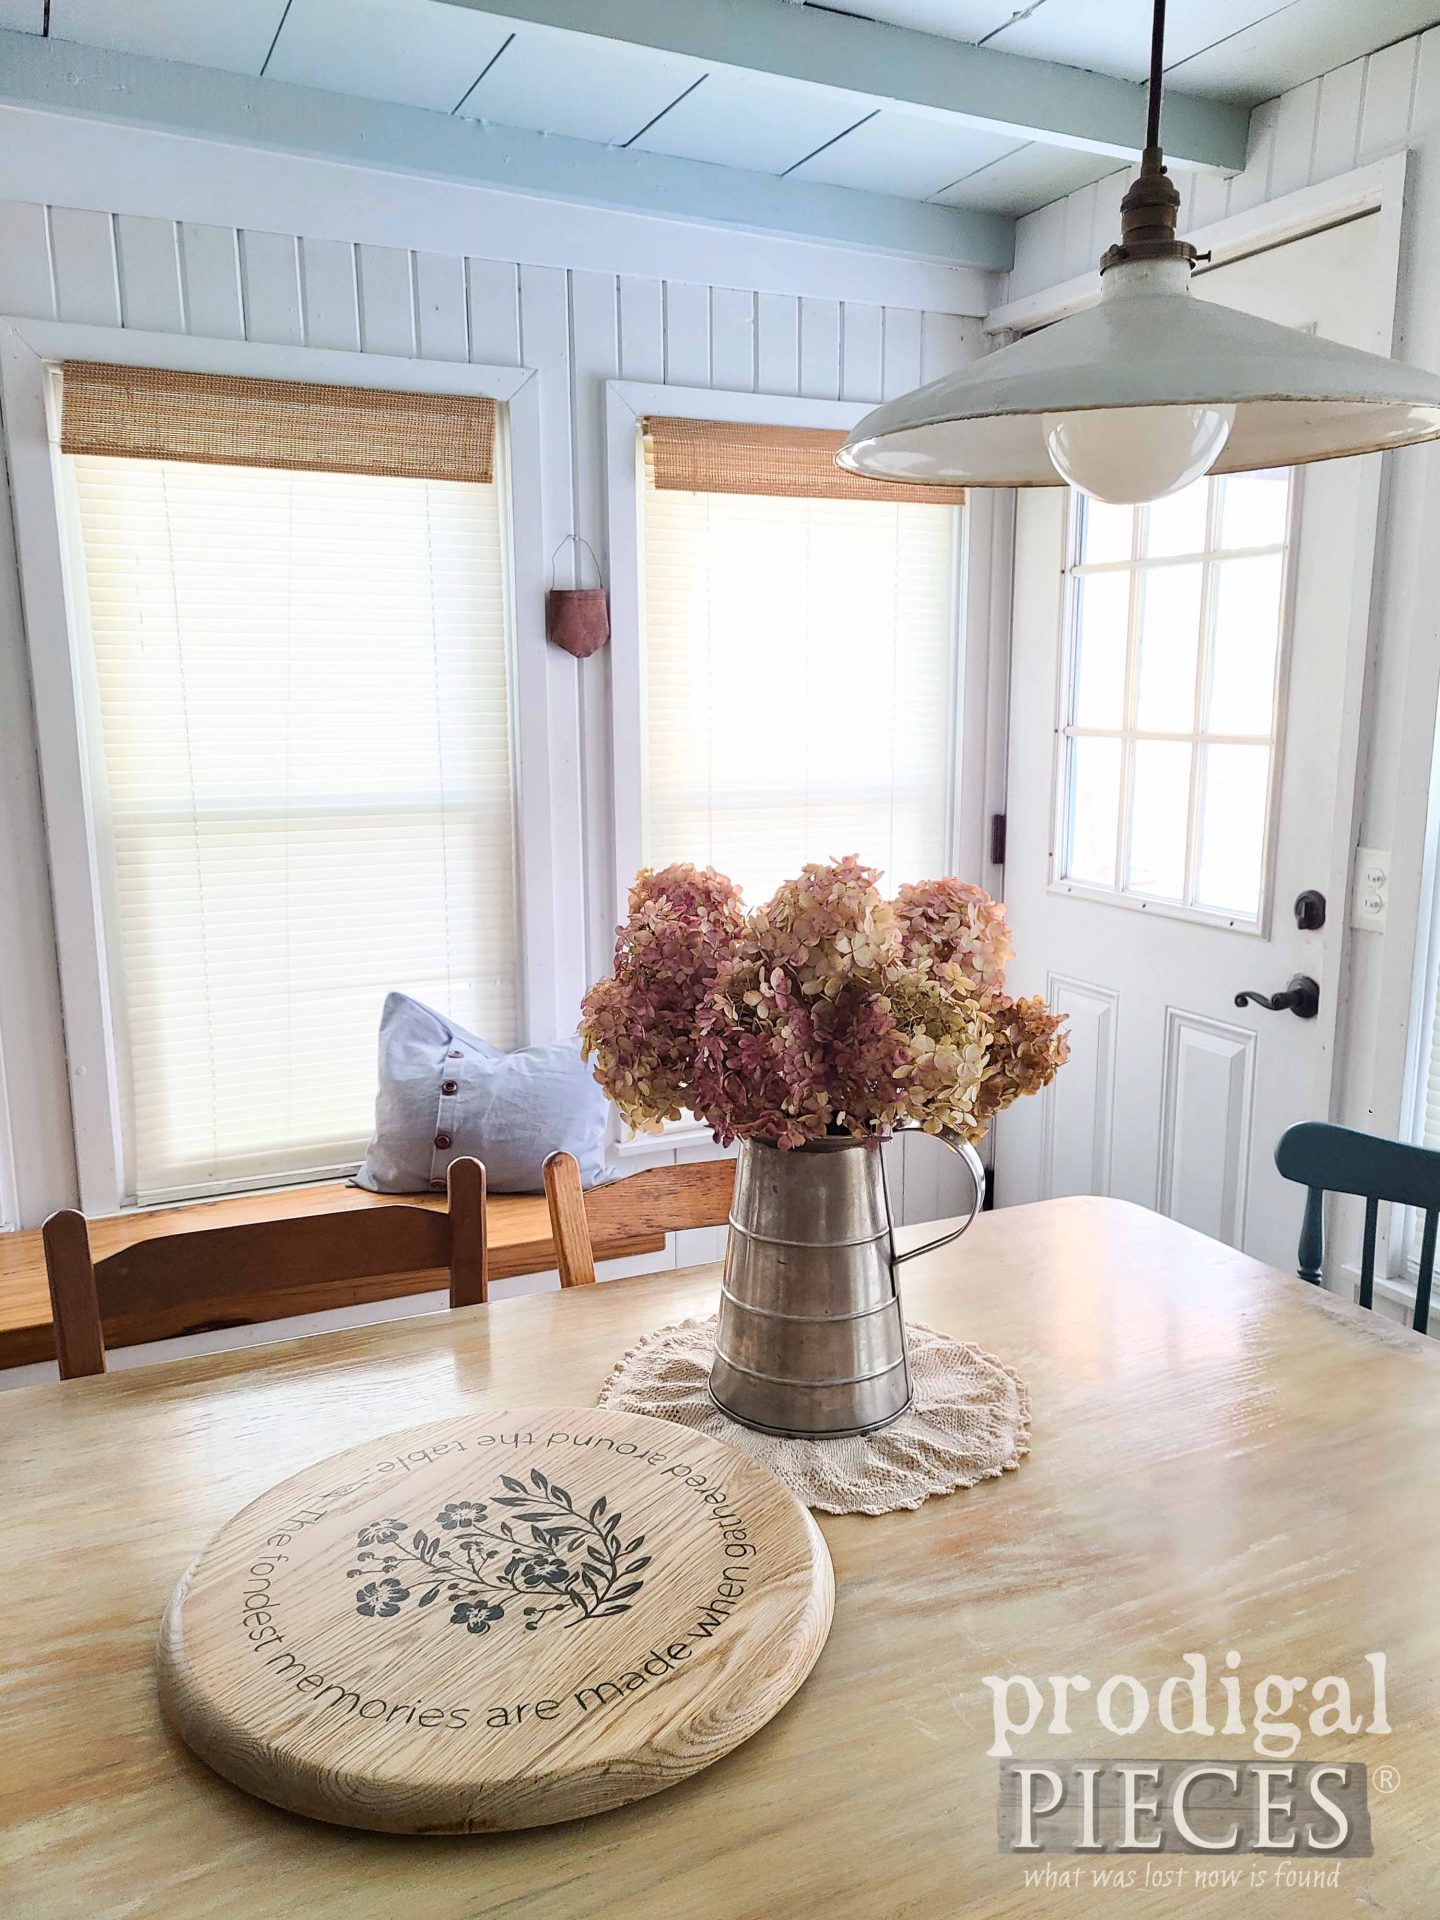 DIY Farmhouse Lazy Susan Upcycled for Home Decor by Larissa of Prodigal Pieces | prodigalpieces.com #prodigalpieces #diy #farmhouse #home #kitchen